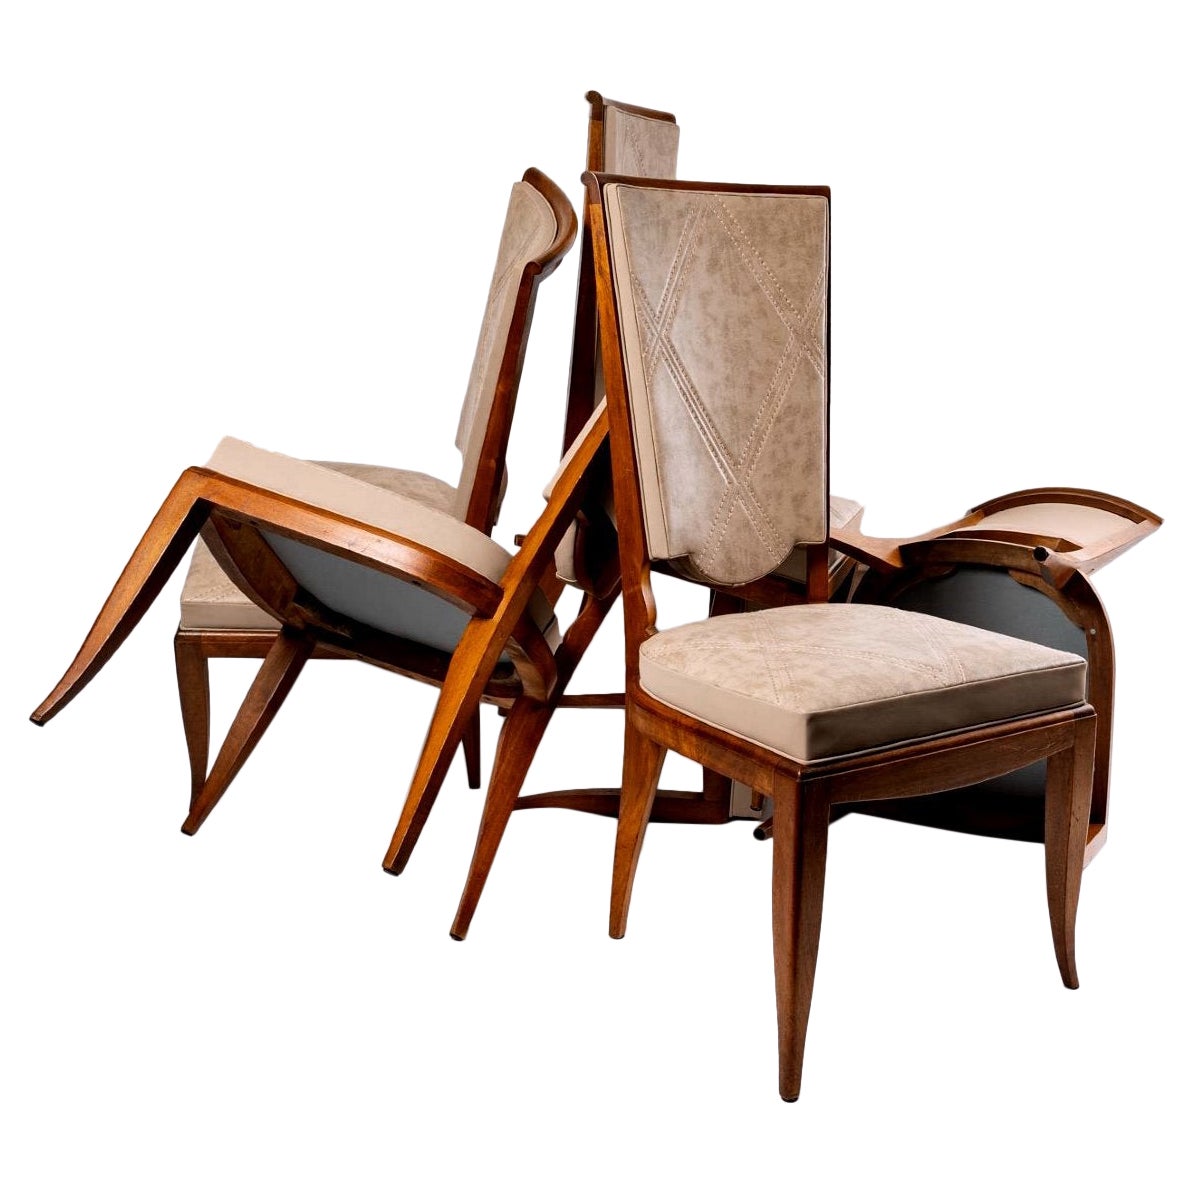 Suite of Six Cabriolet Teak Chairs in Jules Leleu Taste, Period: 20th Century For Sale